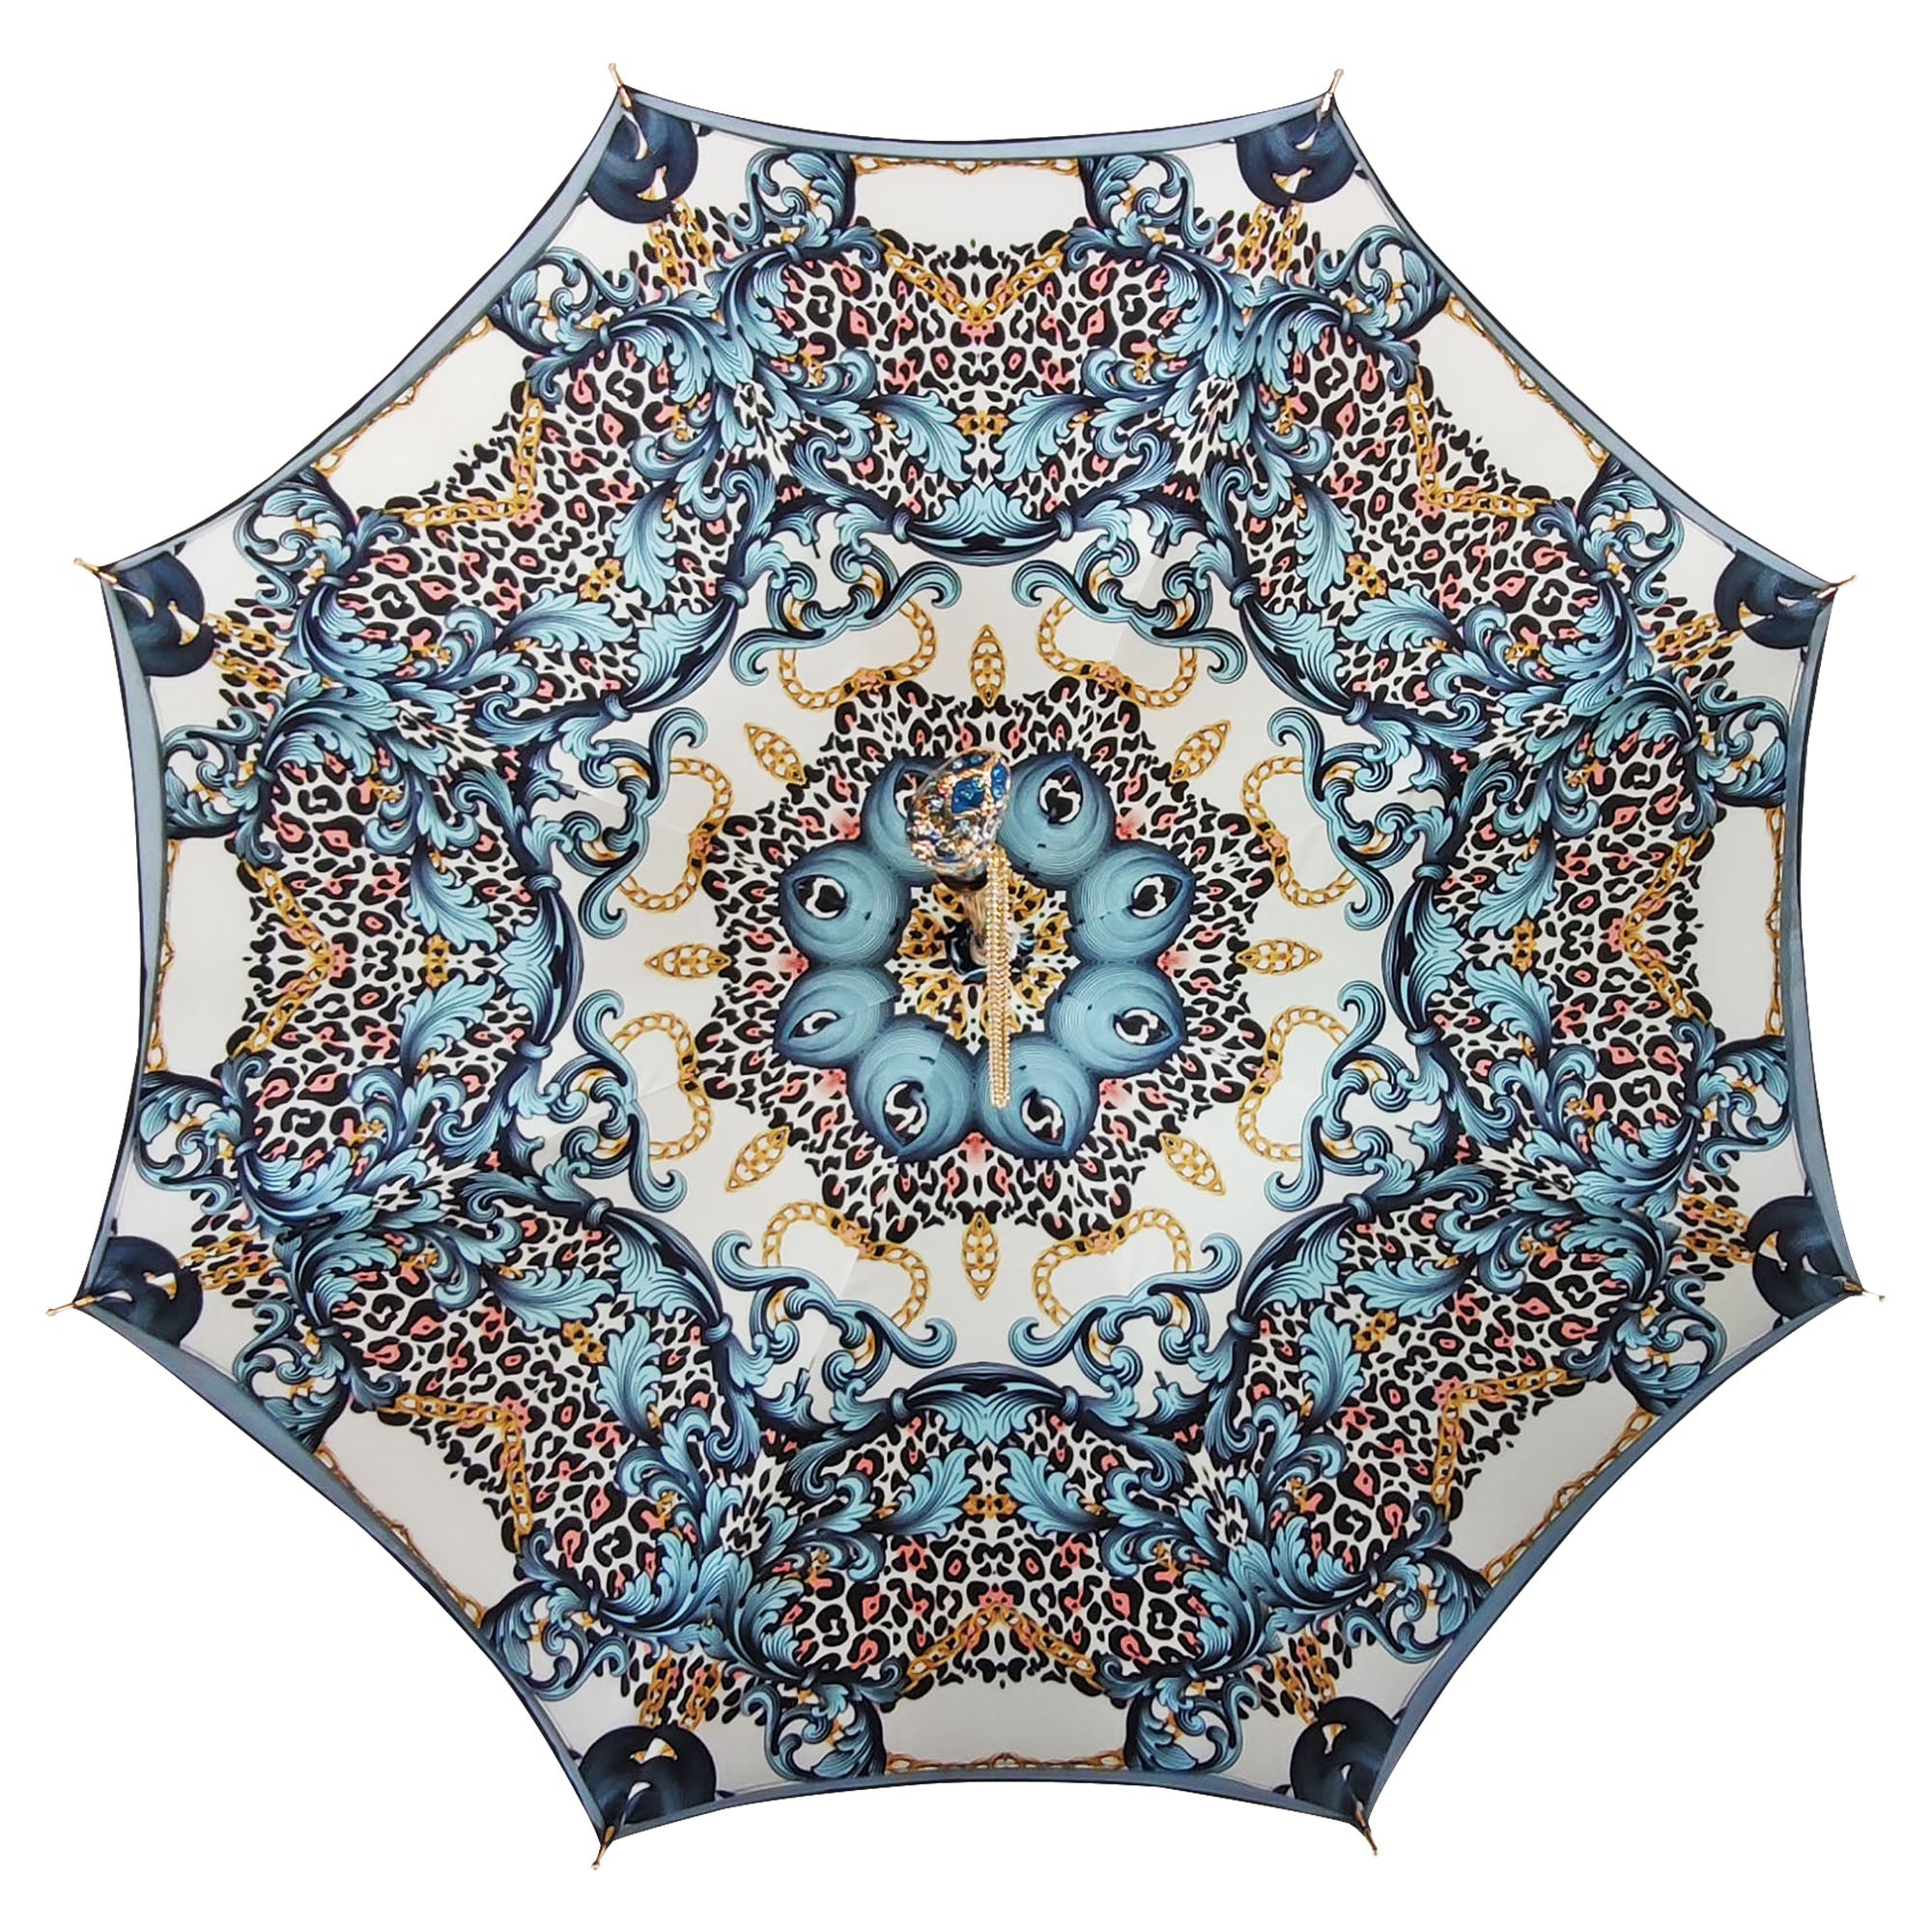 Majestic blue umbrella with turquoise crystals